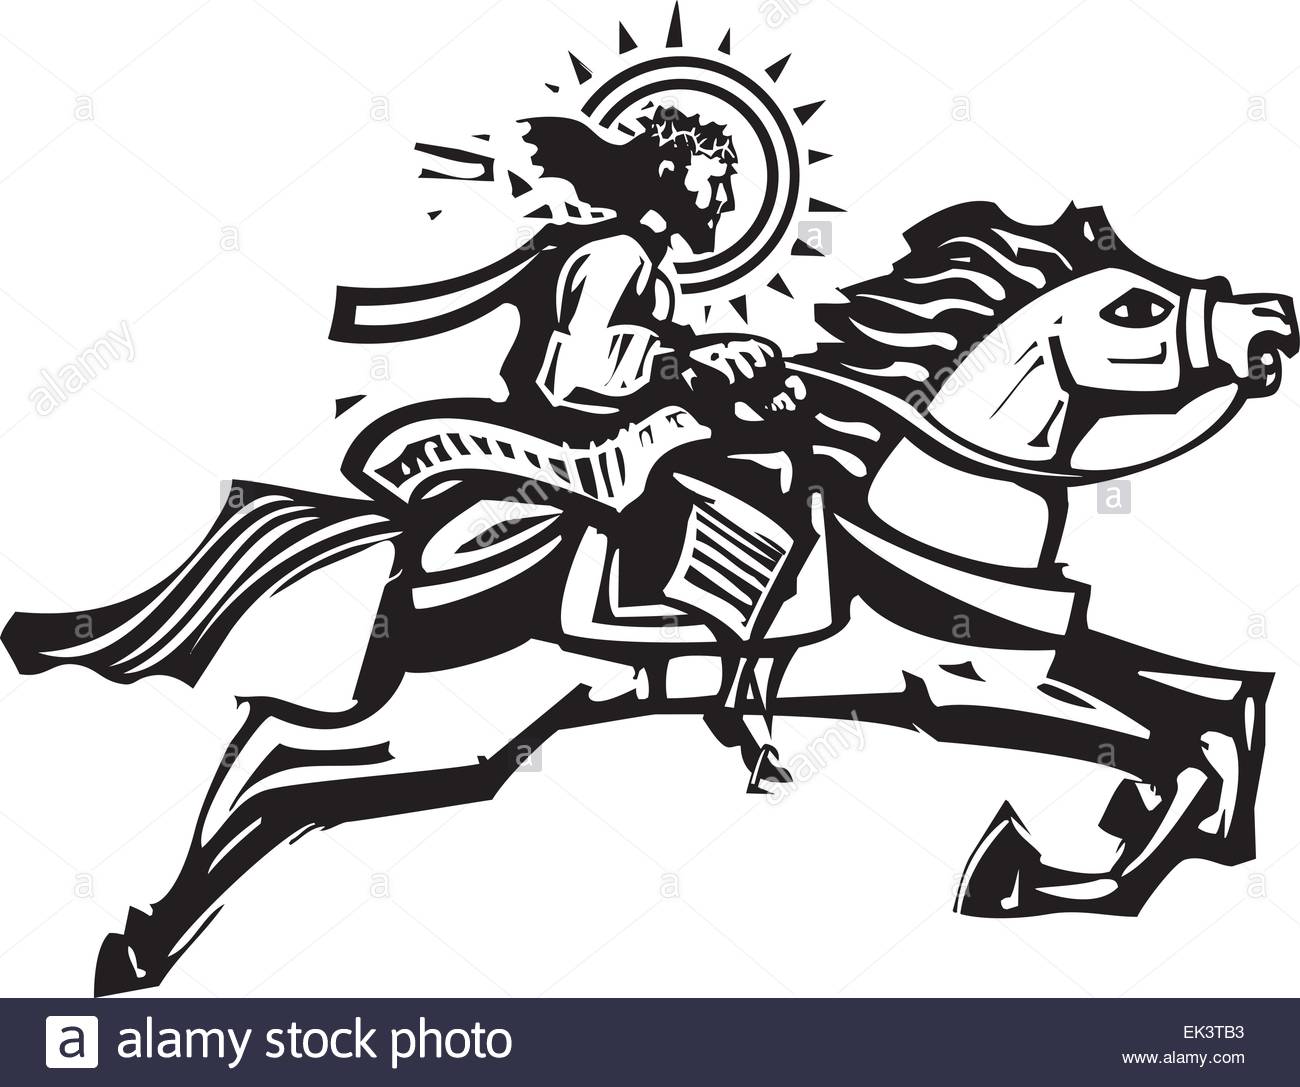 Woodcut Style image of Jesus Christ riding a leaping white horse.